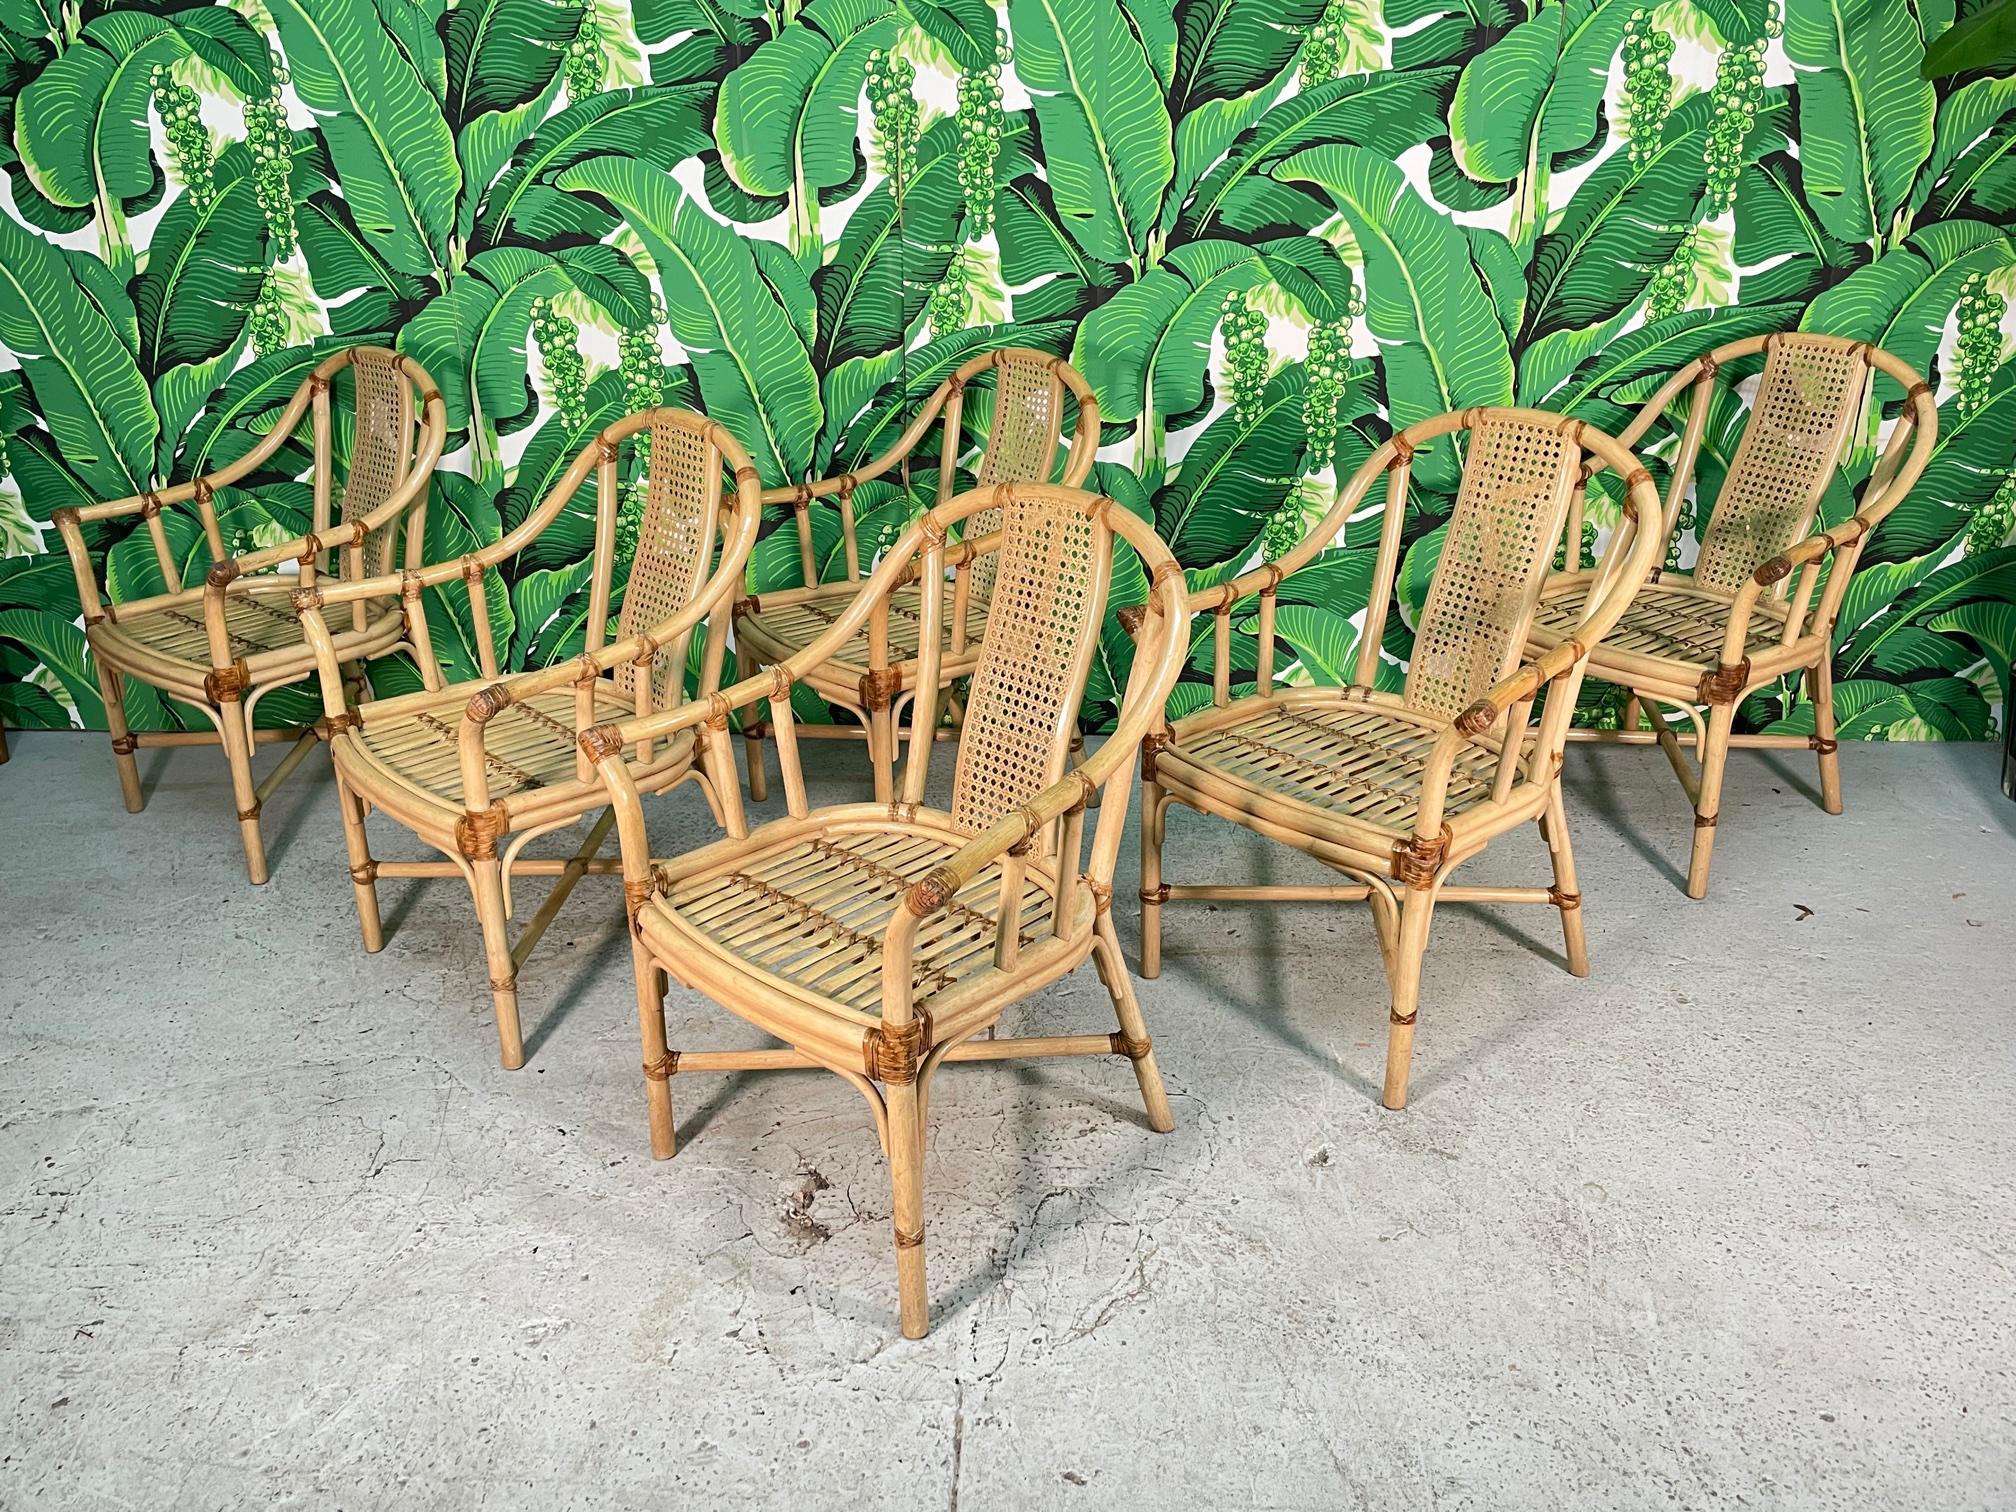 Set of 6 rattan barrel-shaped arm chairs by Drexel Heritage feature bow back with cane insert and leather strapping. Good condition with imperfections consistent with age, see photos for condition details. 
For a shipping quote to your exact zip